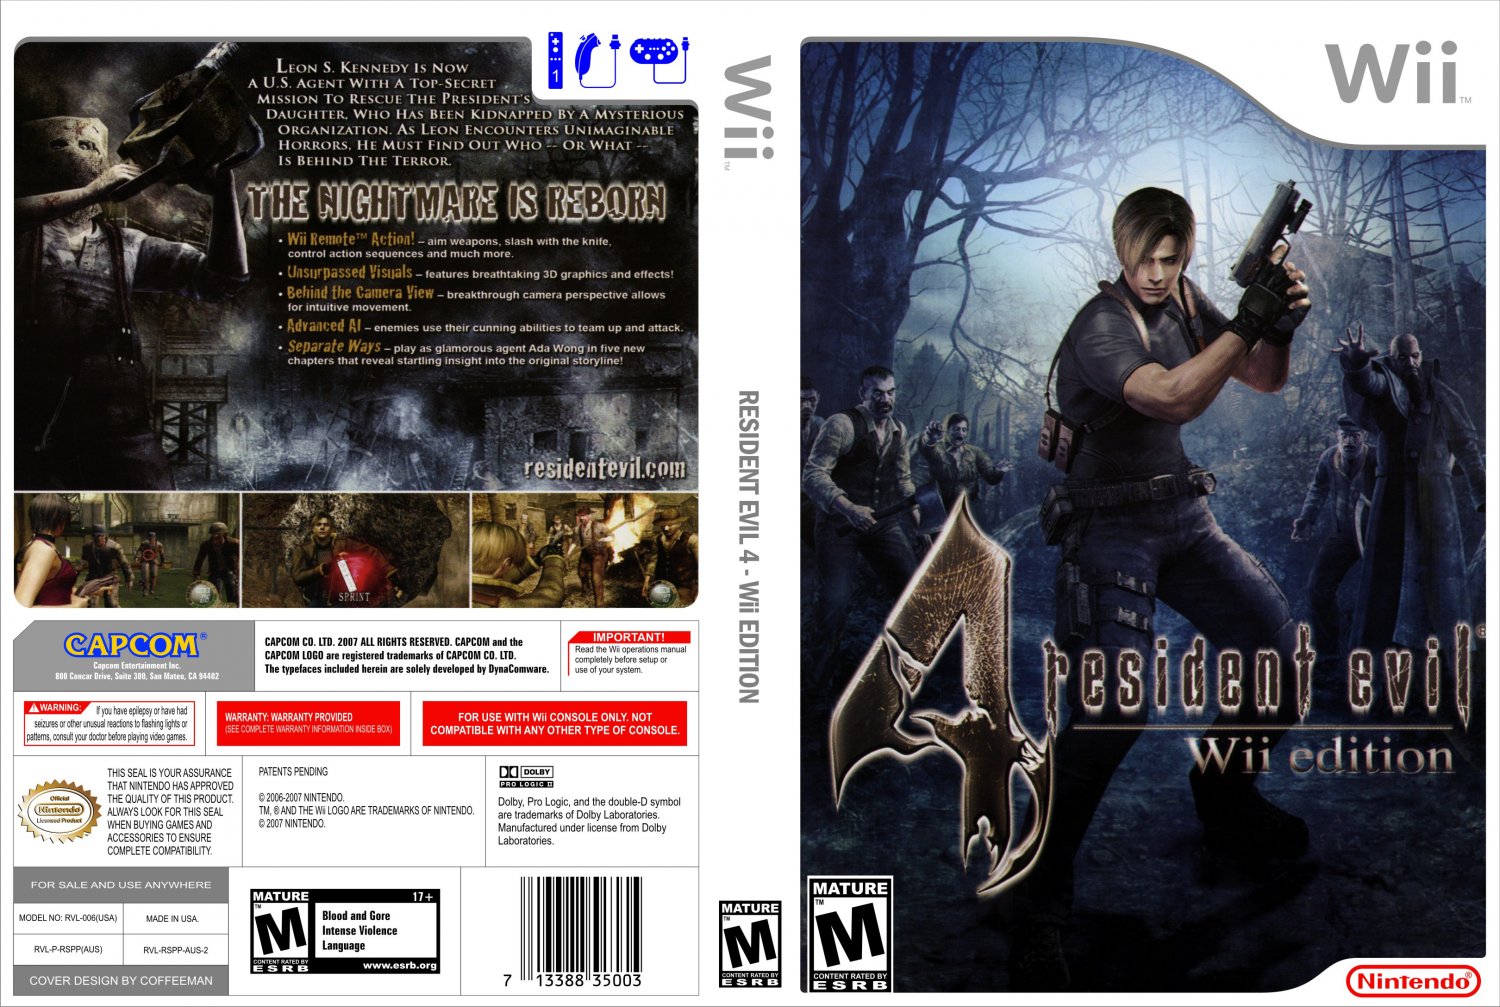 Resident Evil 4 - Wii Edition